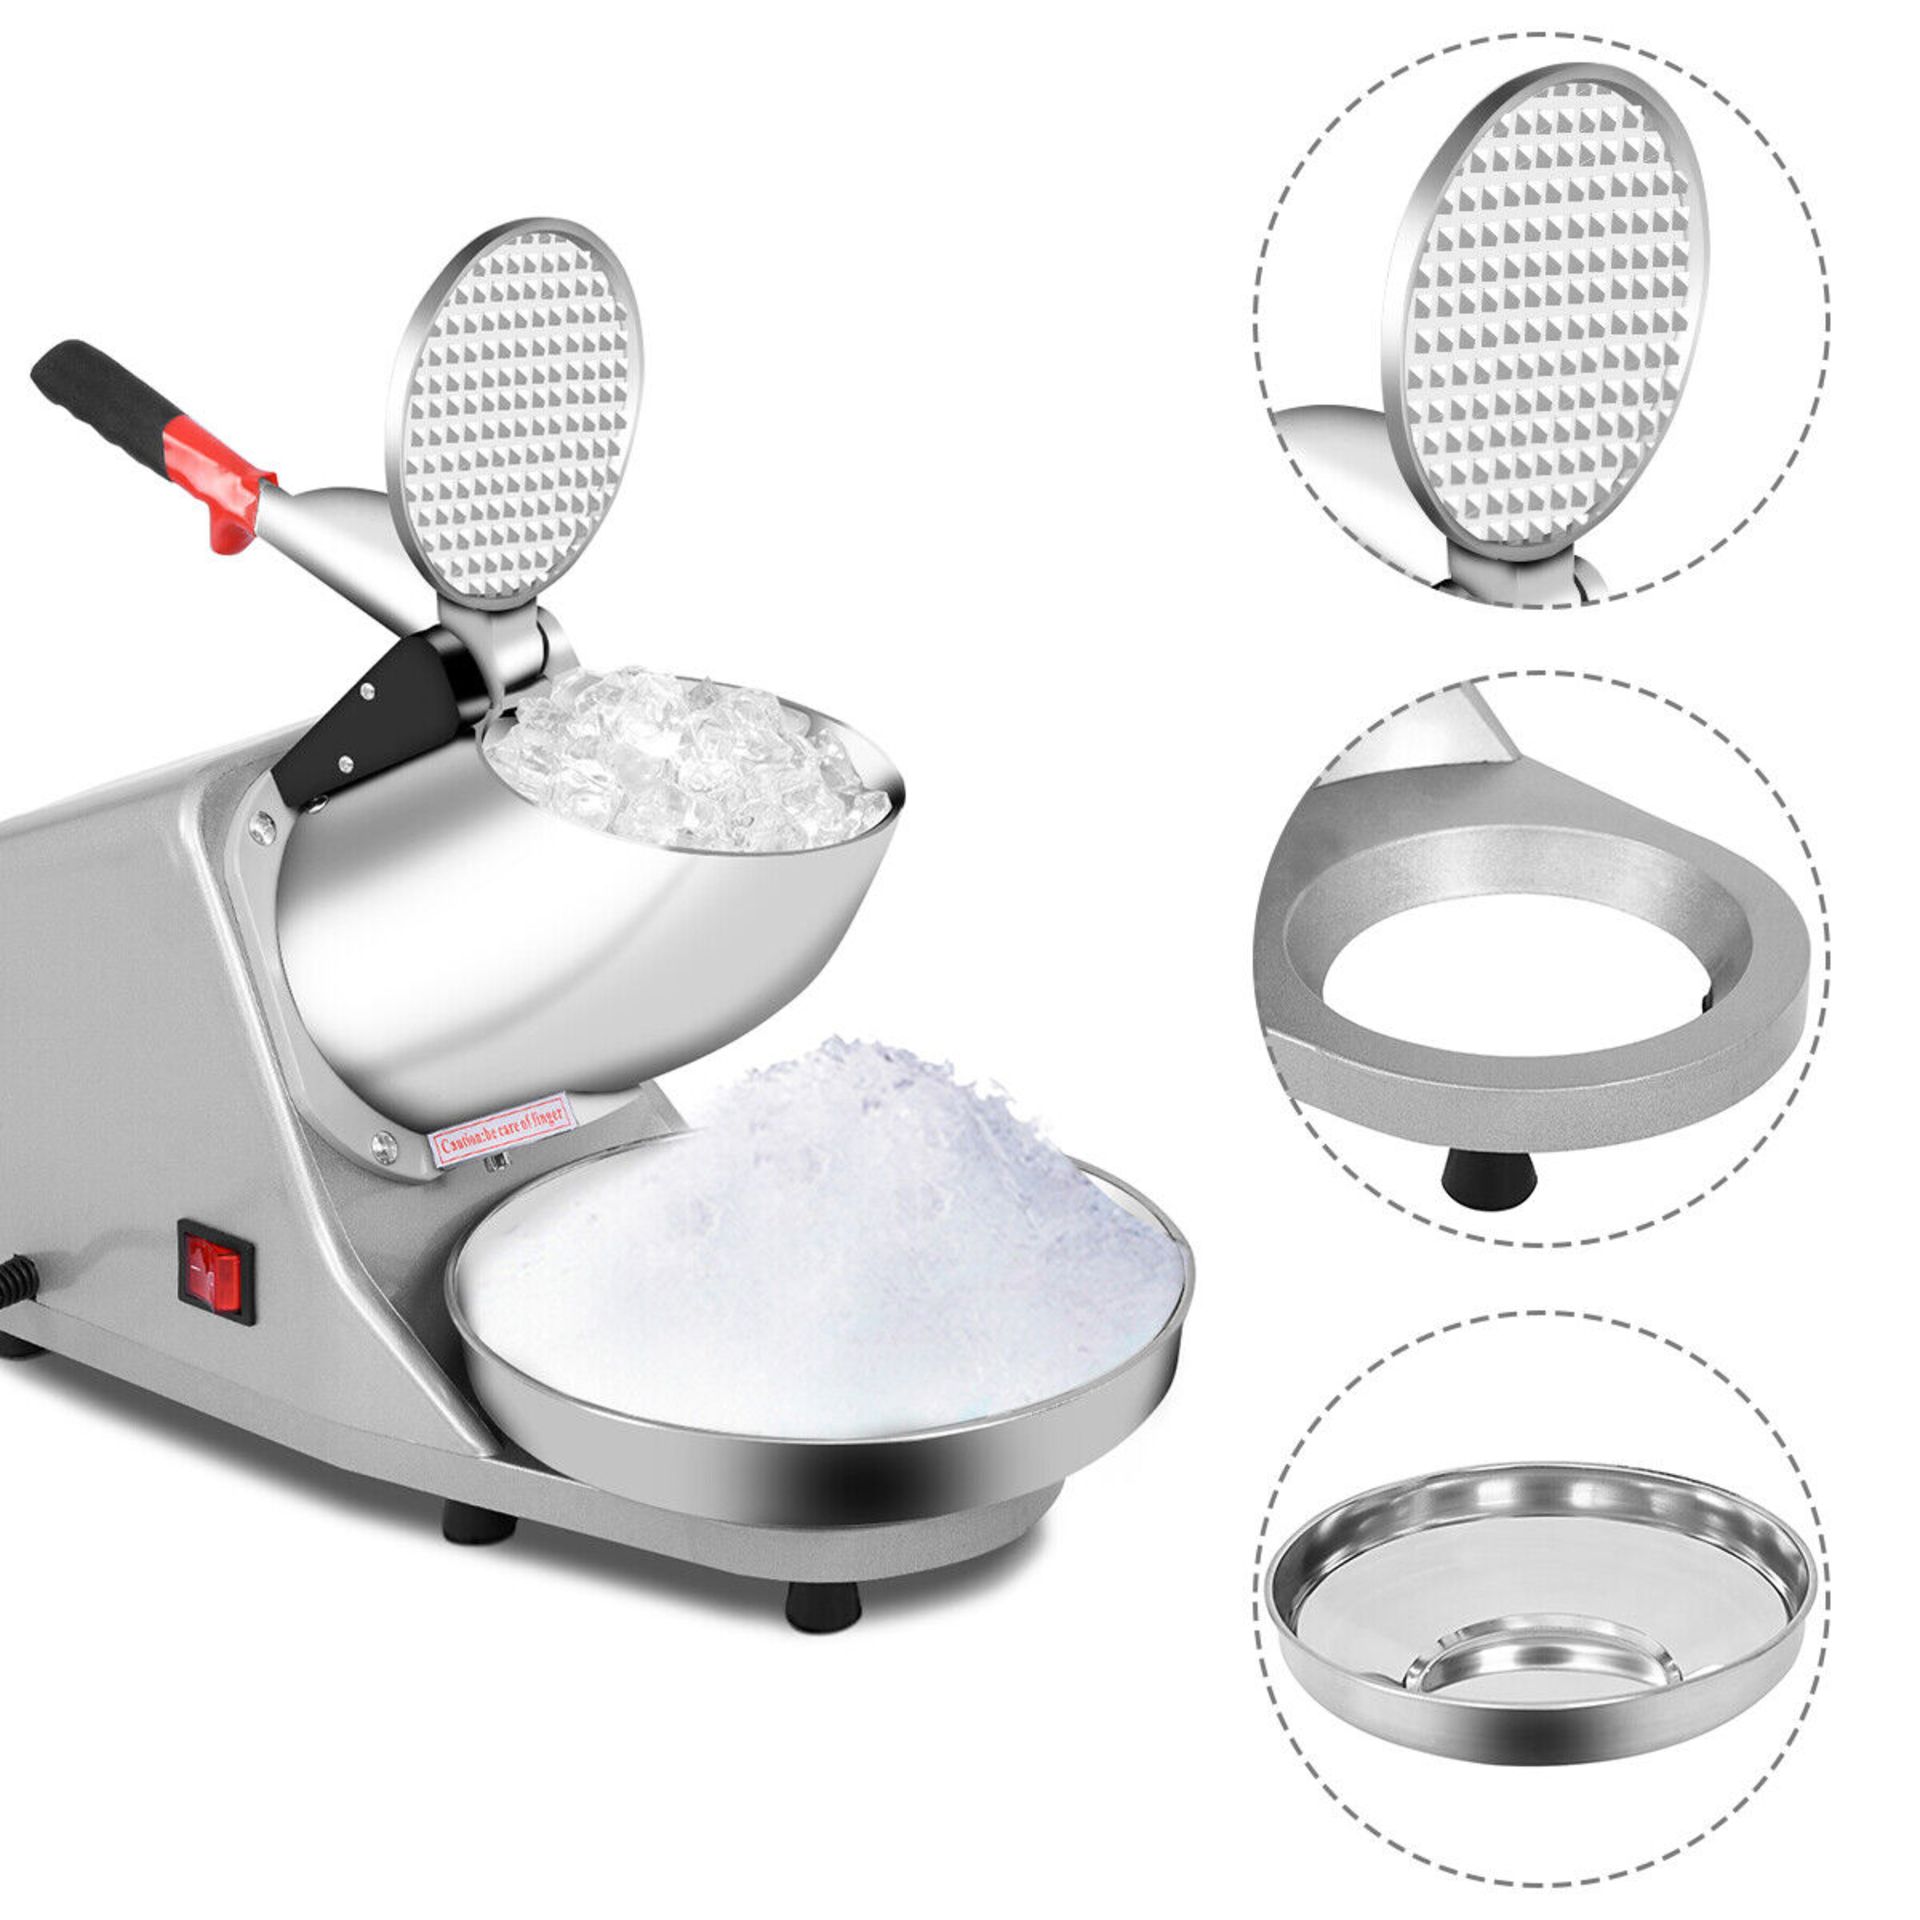 Ice Crusher Electric Ice Shaver Machine Stainless Steel Snow Cone Maker 200W - ER54